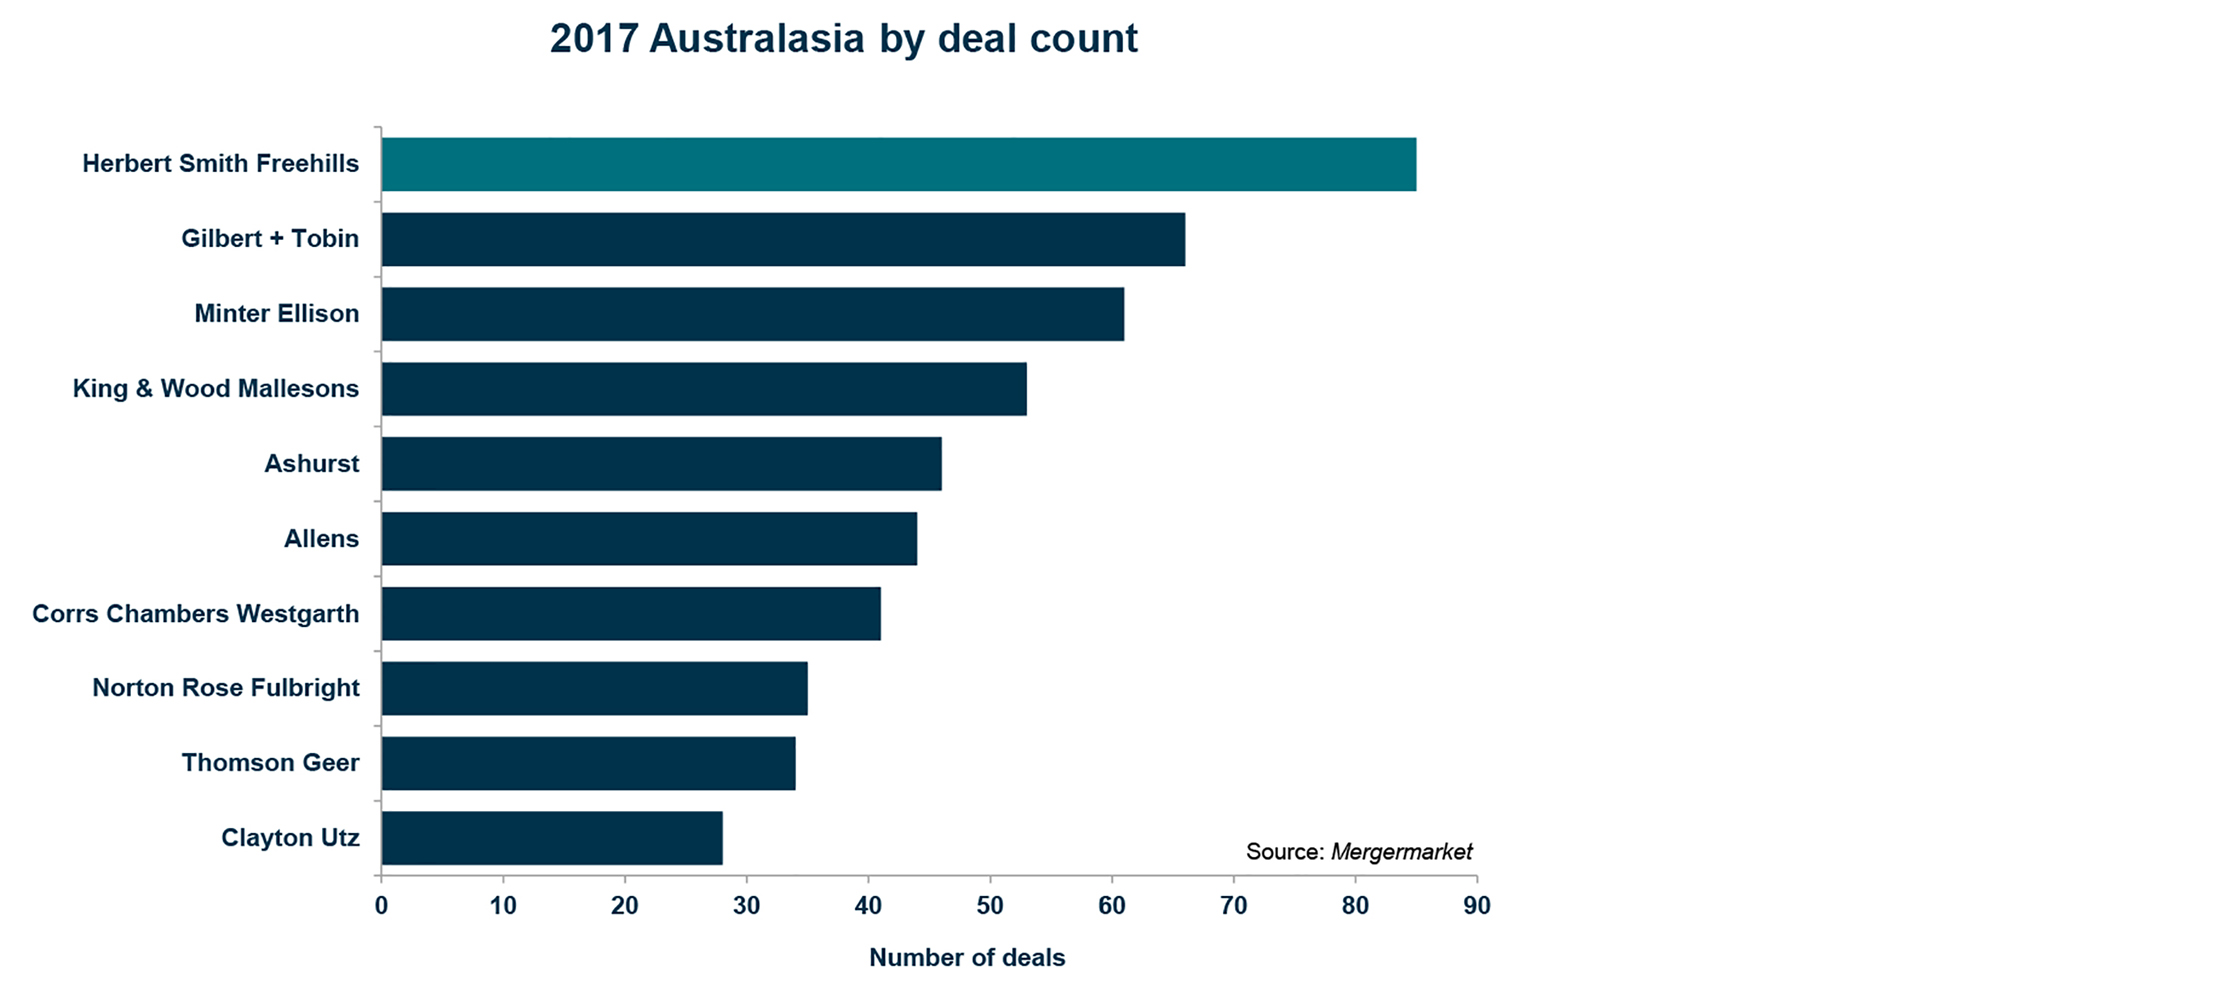 Total deals by deal count - Mergermarket